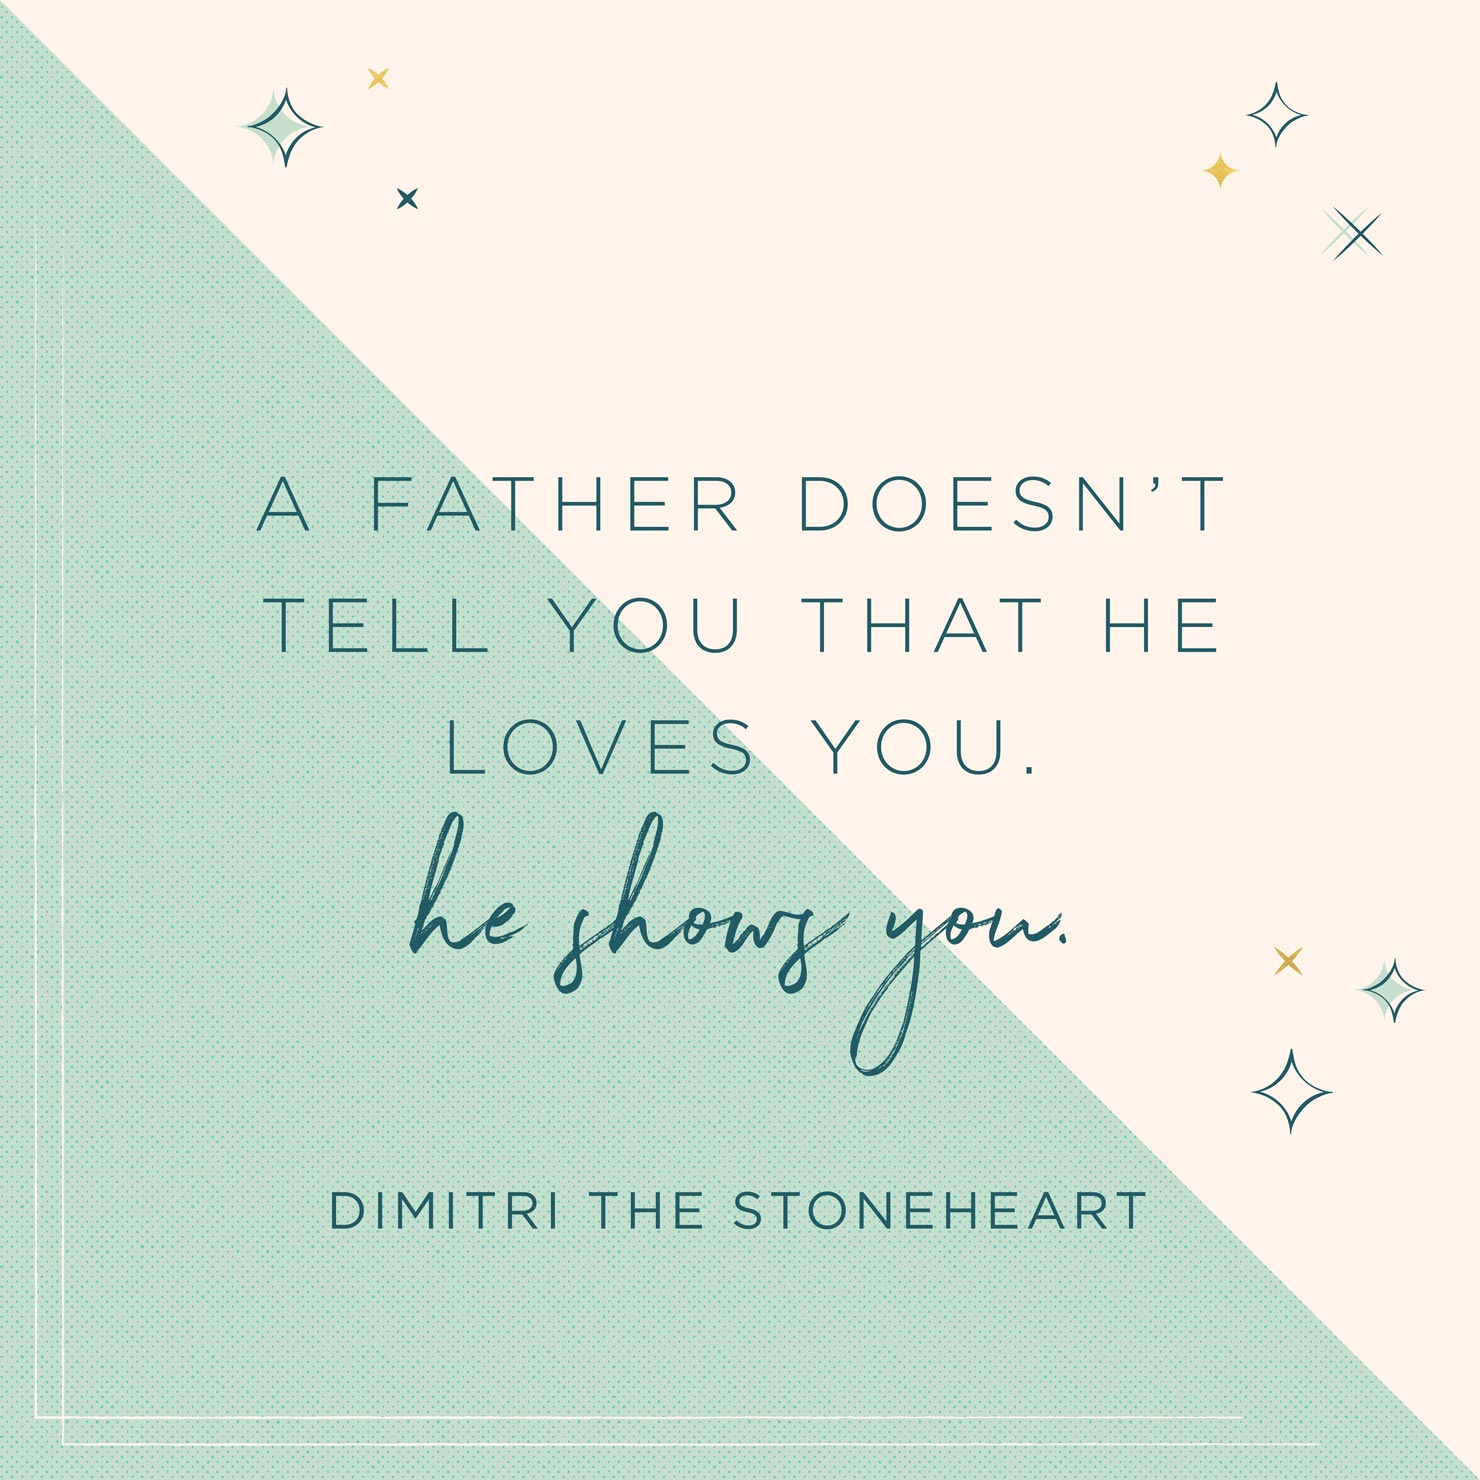 a father doesn’t tell you thta the loves youi. he shows you. dimitri the stoneheart